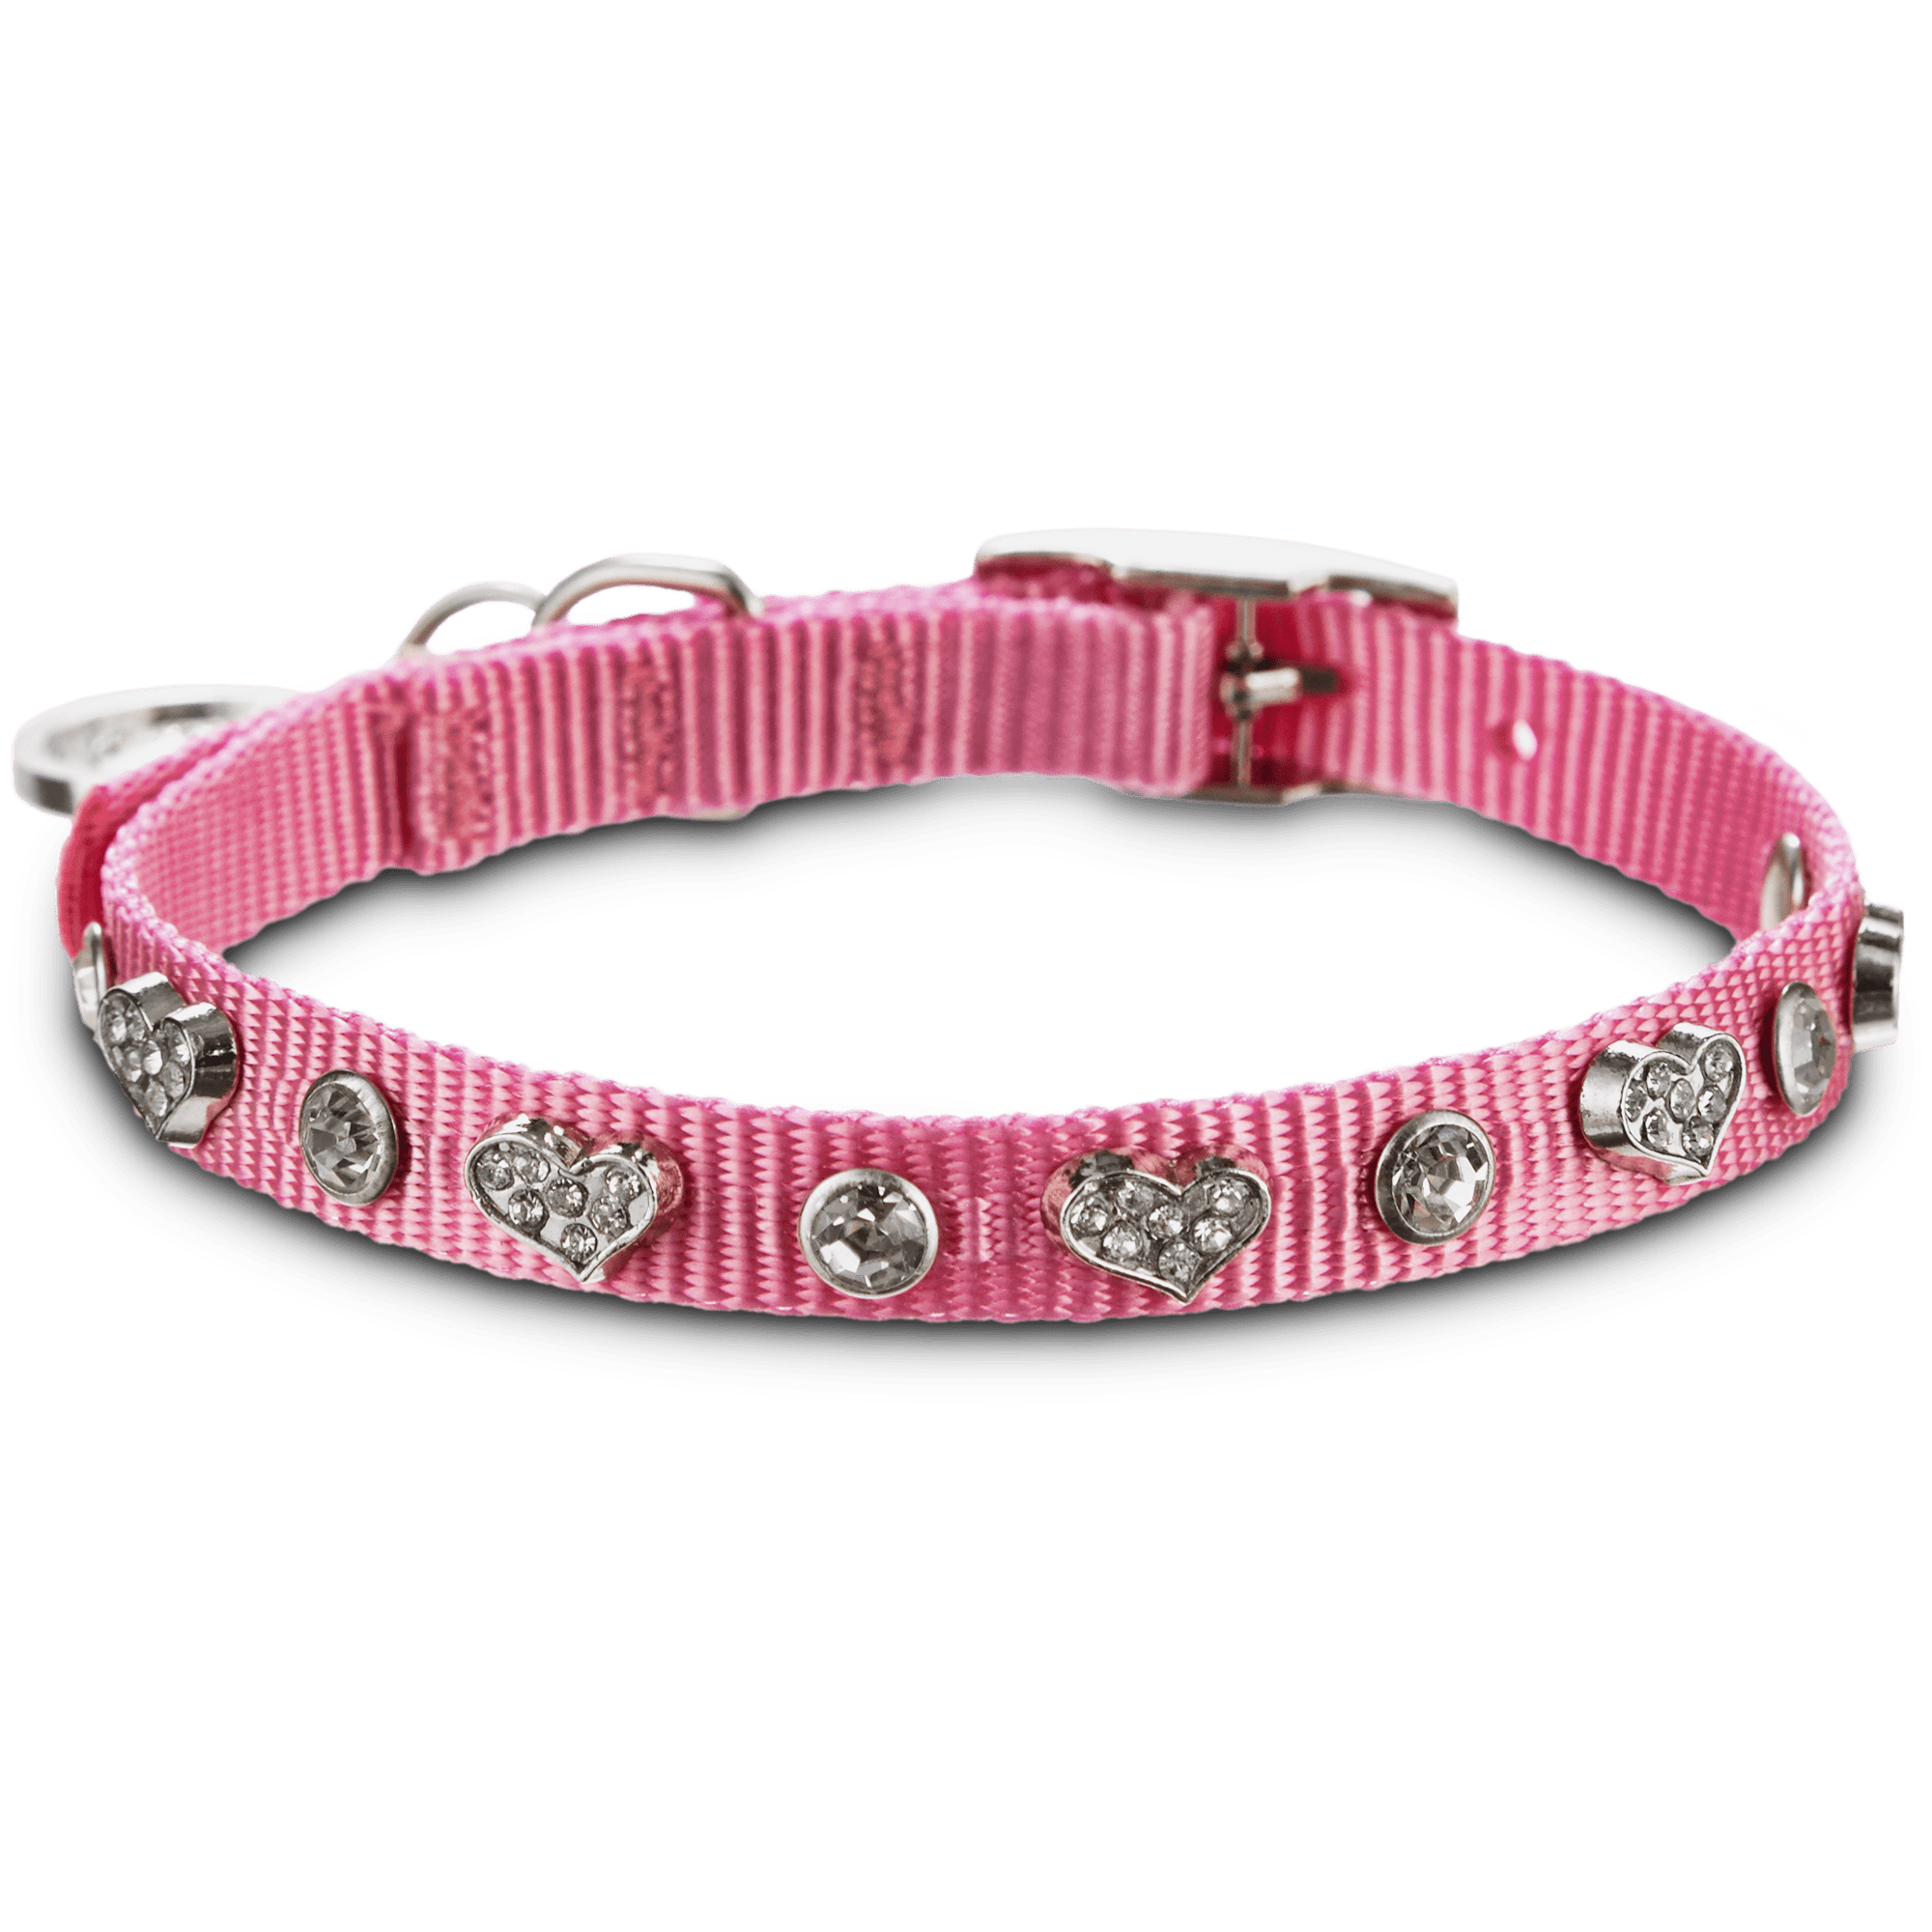 petco collars and leashes